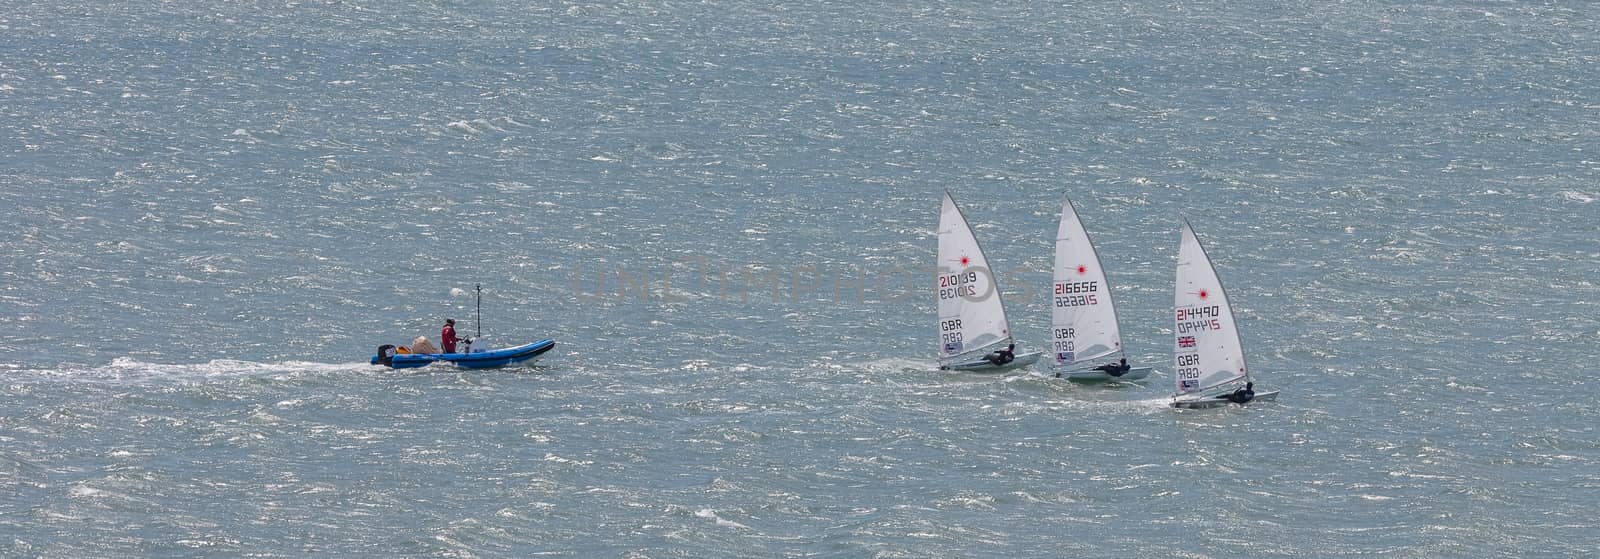 Portland harbour, United Kingdom - July 3, 2020: High Angle aerial panoramic shot of the laser class racing dinghies and a rescue boat in Portland harbour.